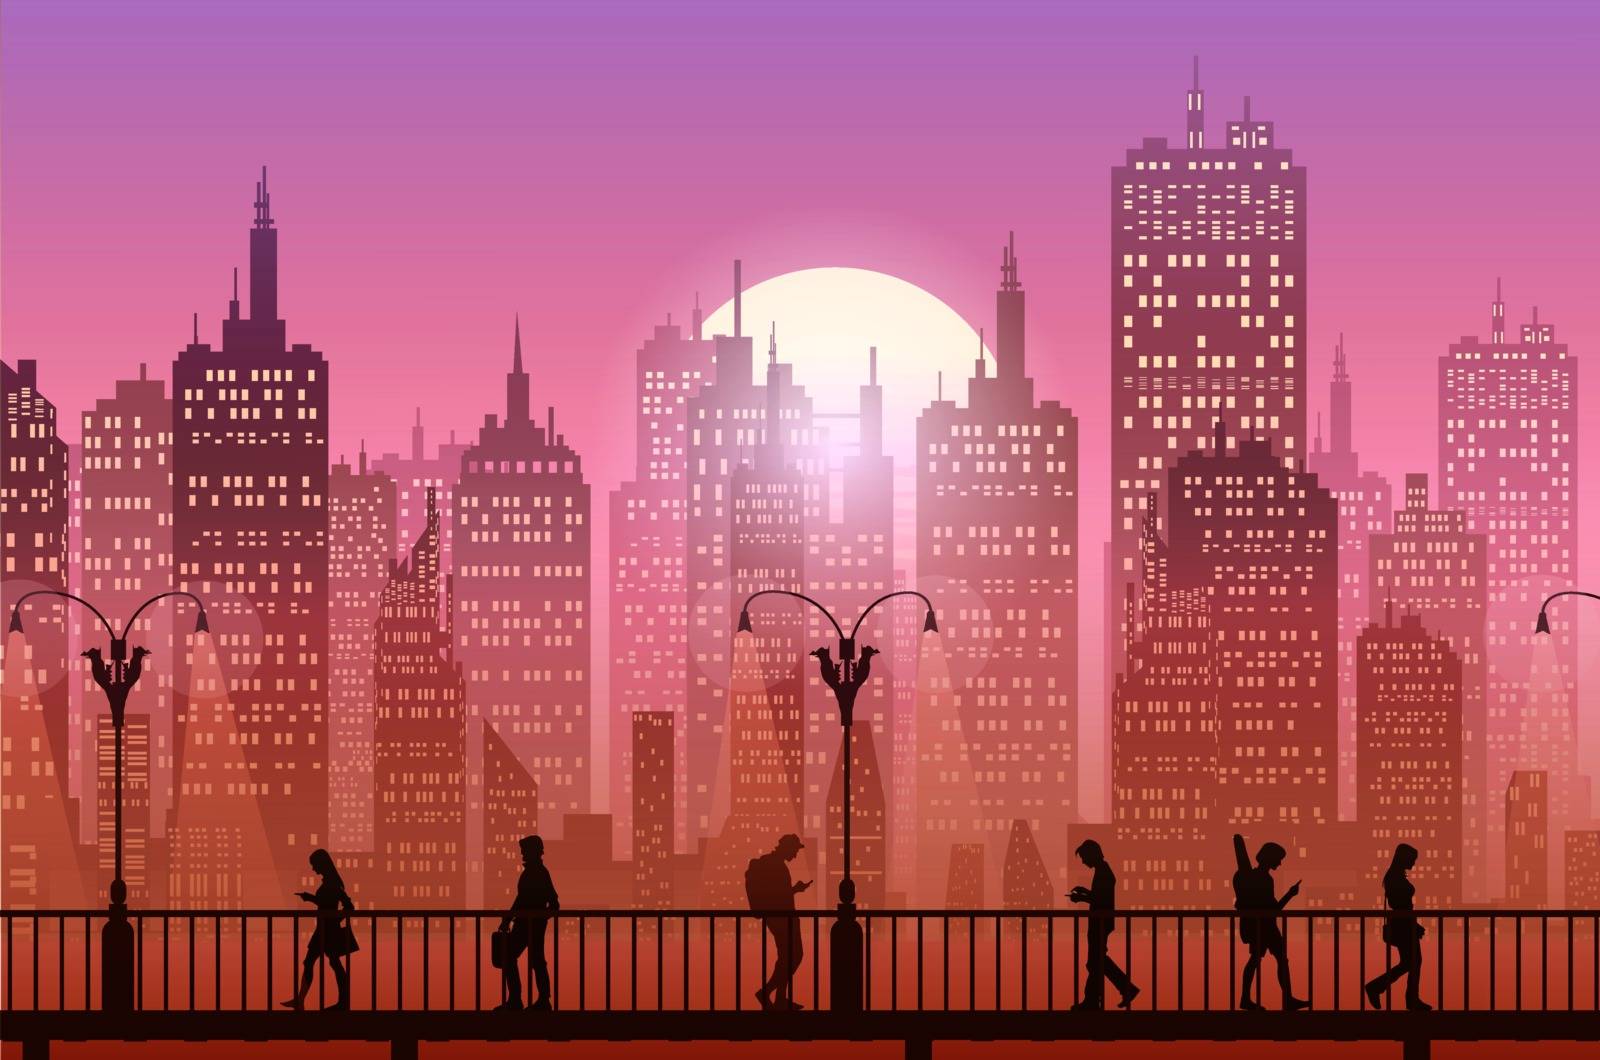 Downtown city wallpaper in the evening landscape wallpaper Sunset Illustration vector style Sunlight colorful view background